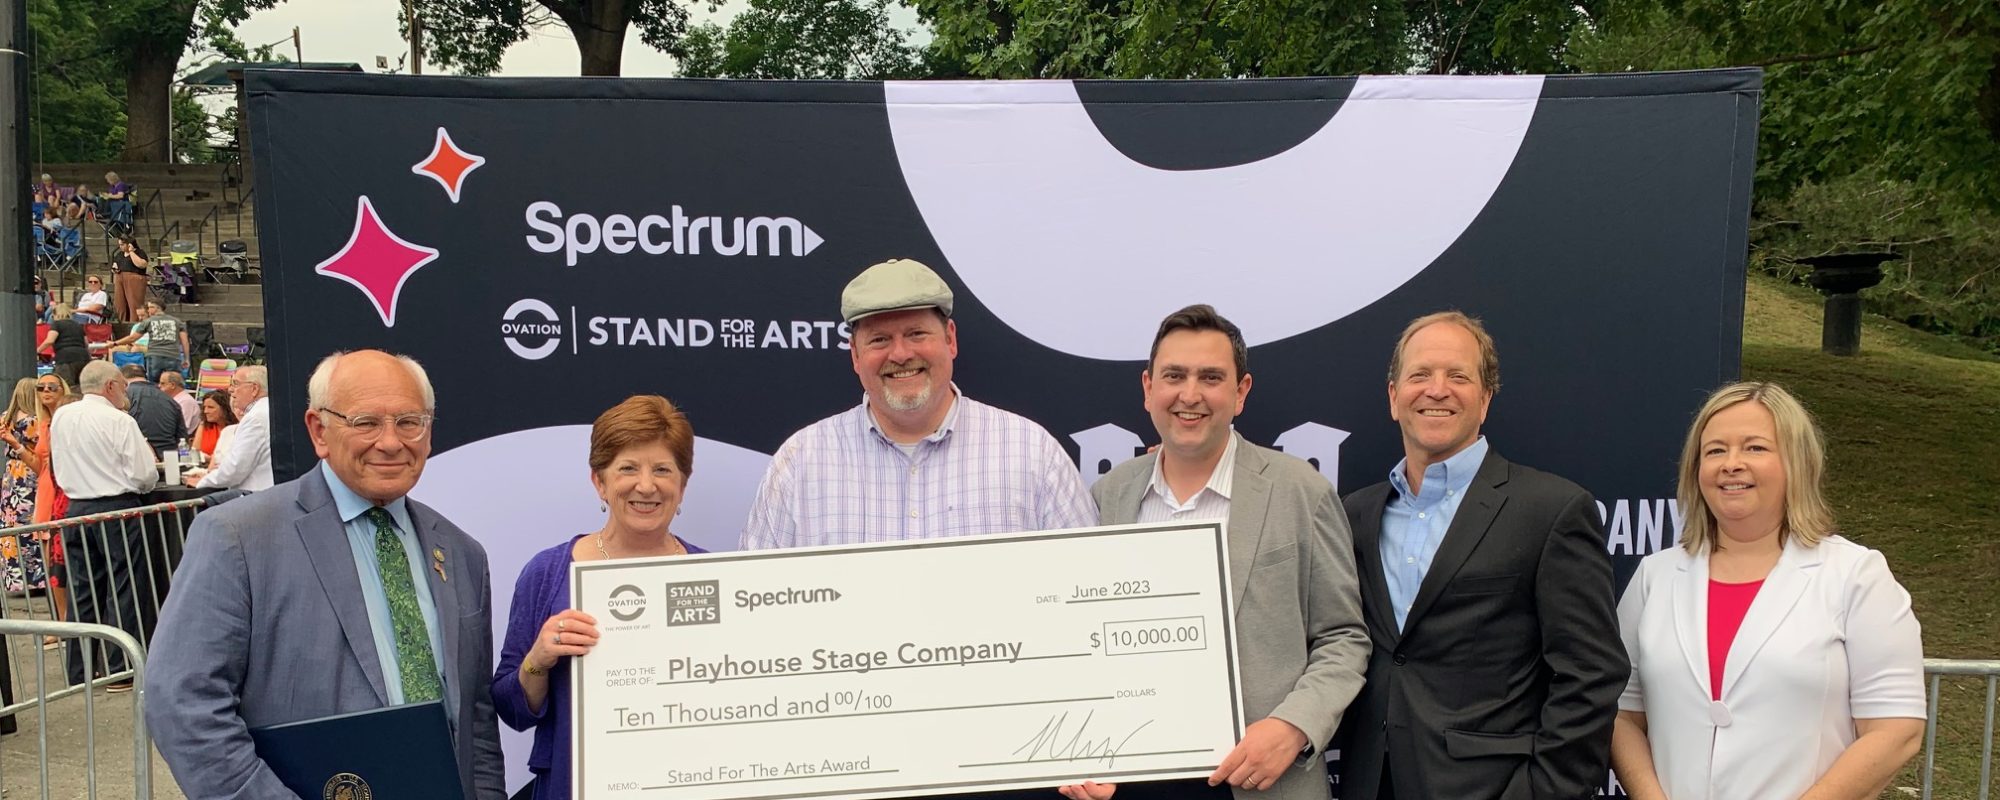 SPECTRUM PARTNERS WITH OVATION TV TO SUPPORT PARK PLAYHOUSE/PLAYHOUSE STAGE COMPANY WITH $10,000 STAND FOR THE ARTS AWARD